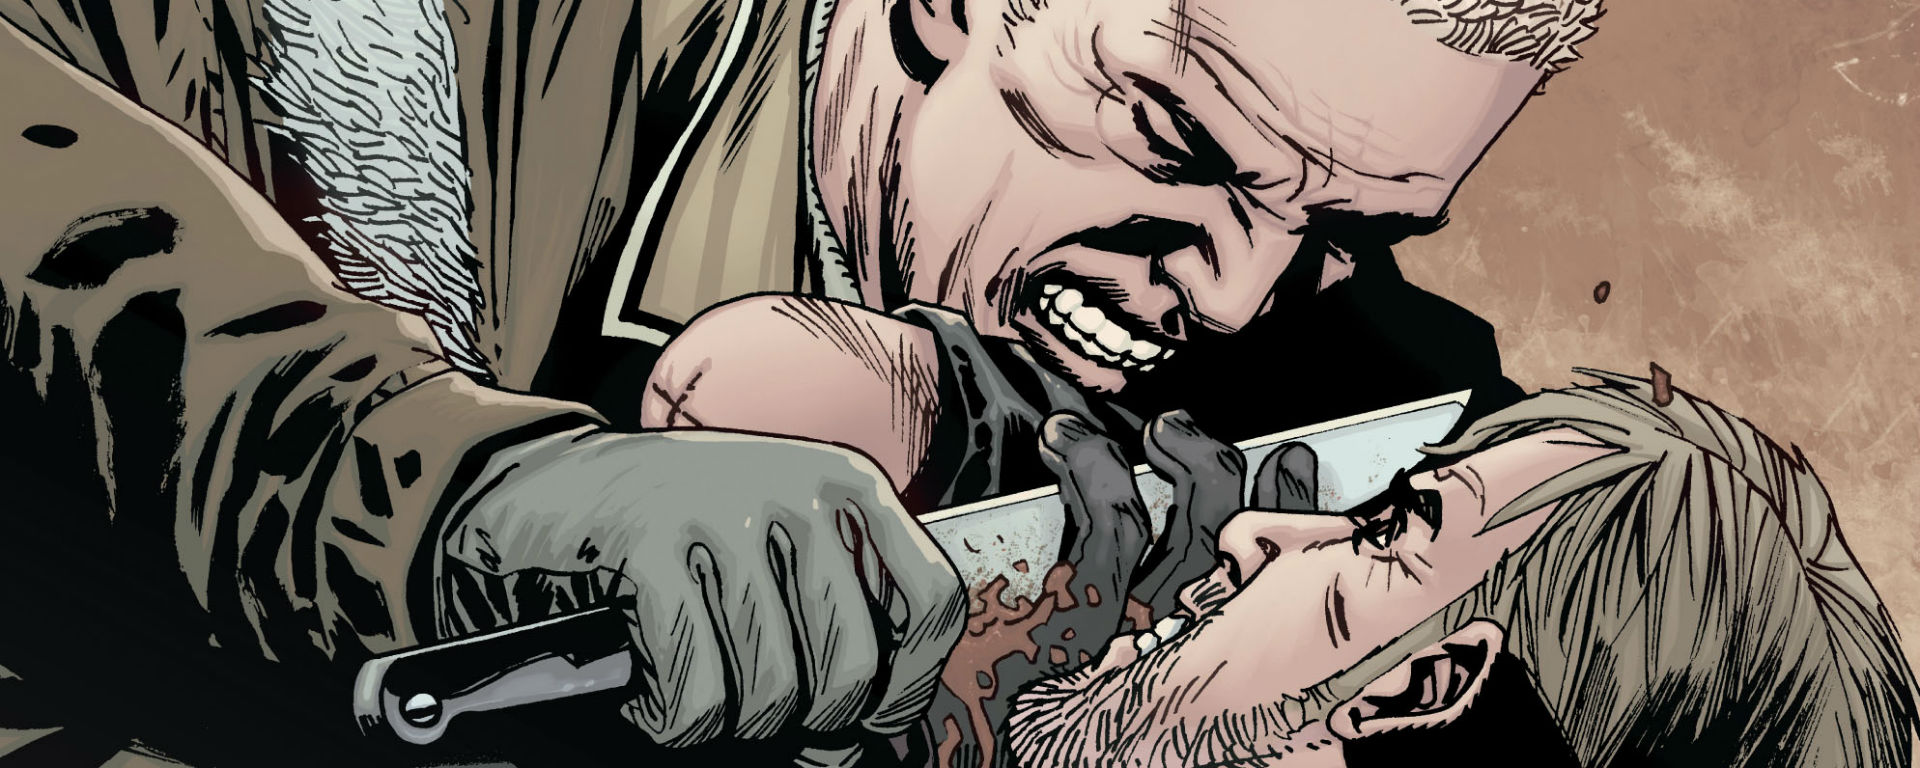 image comics the walking dead 95 review feature image